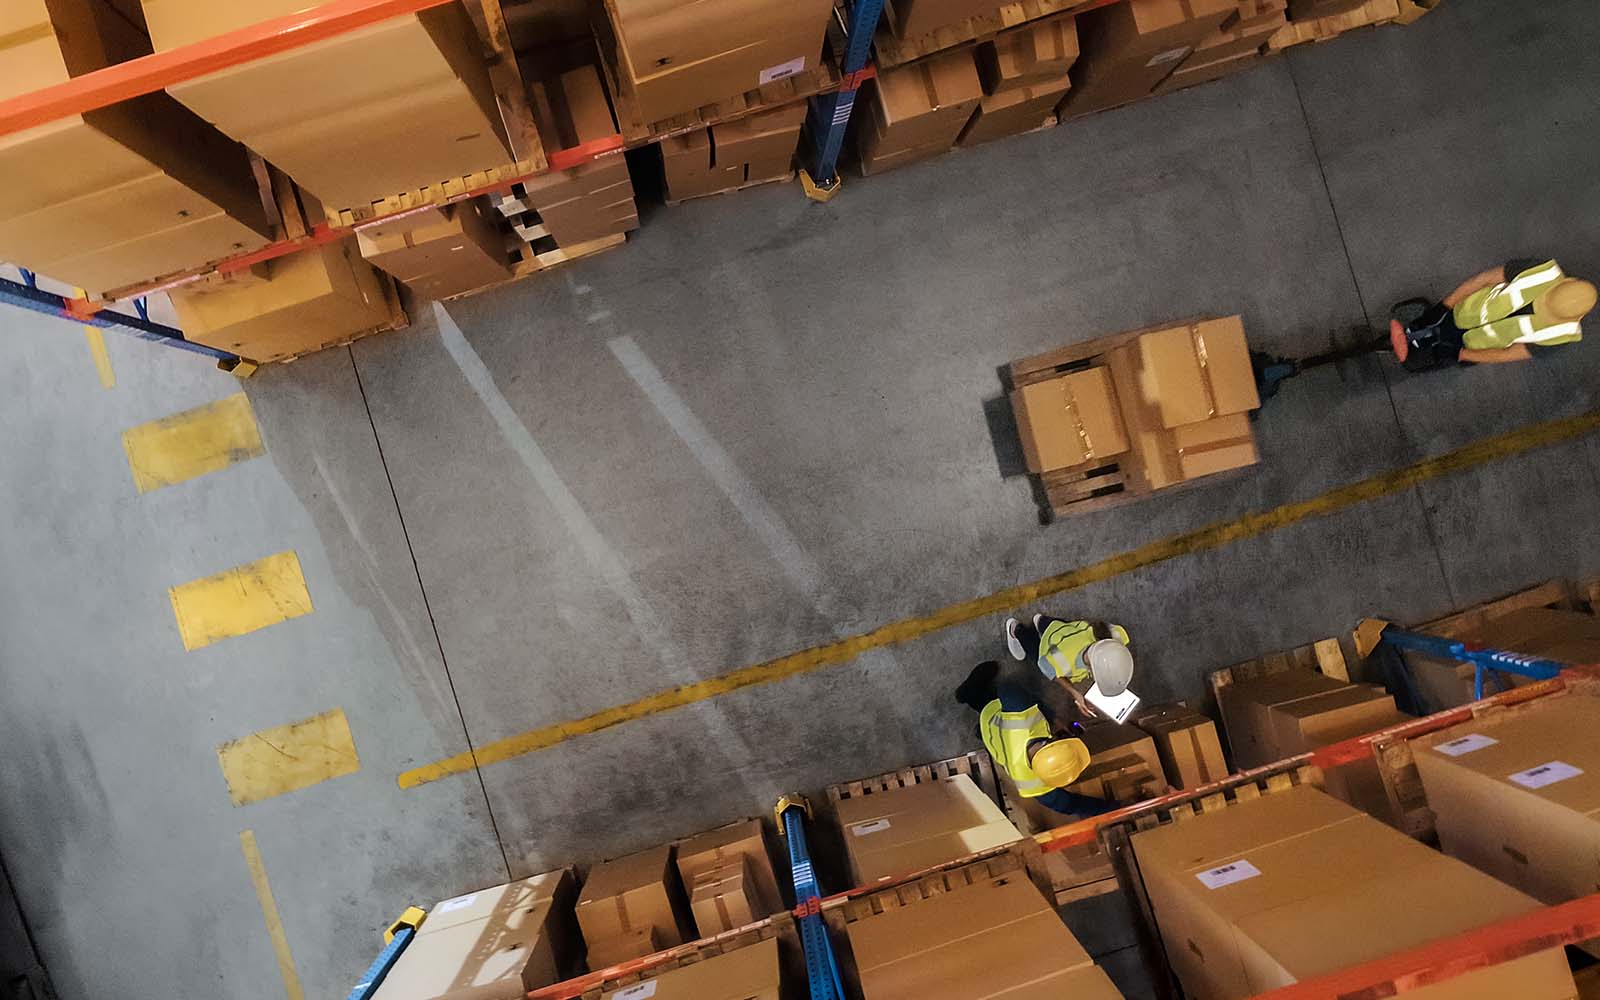 Worker Moving Goods in Retail Warehouse